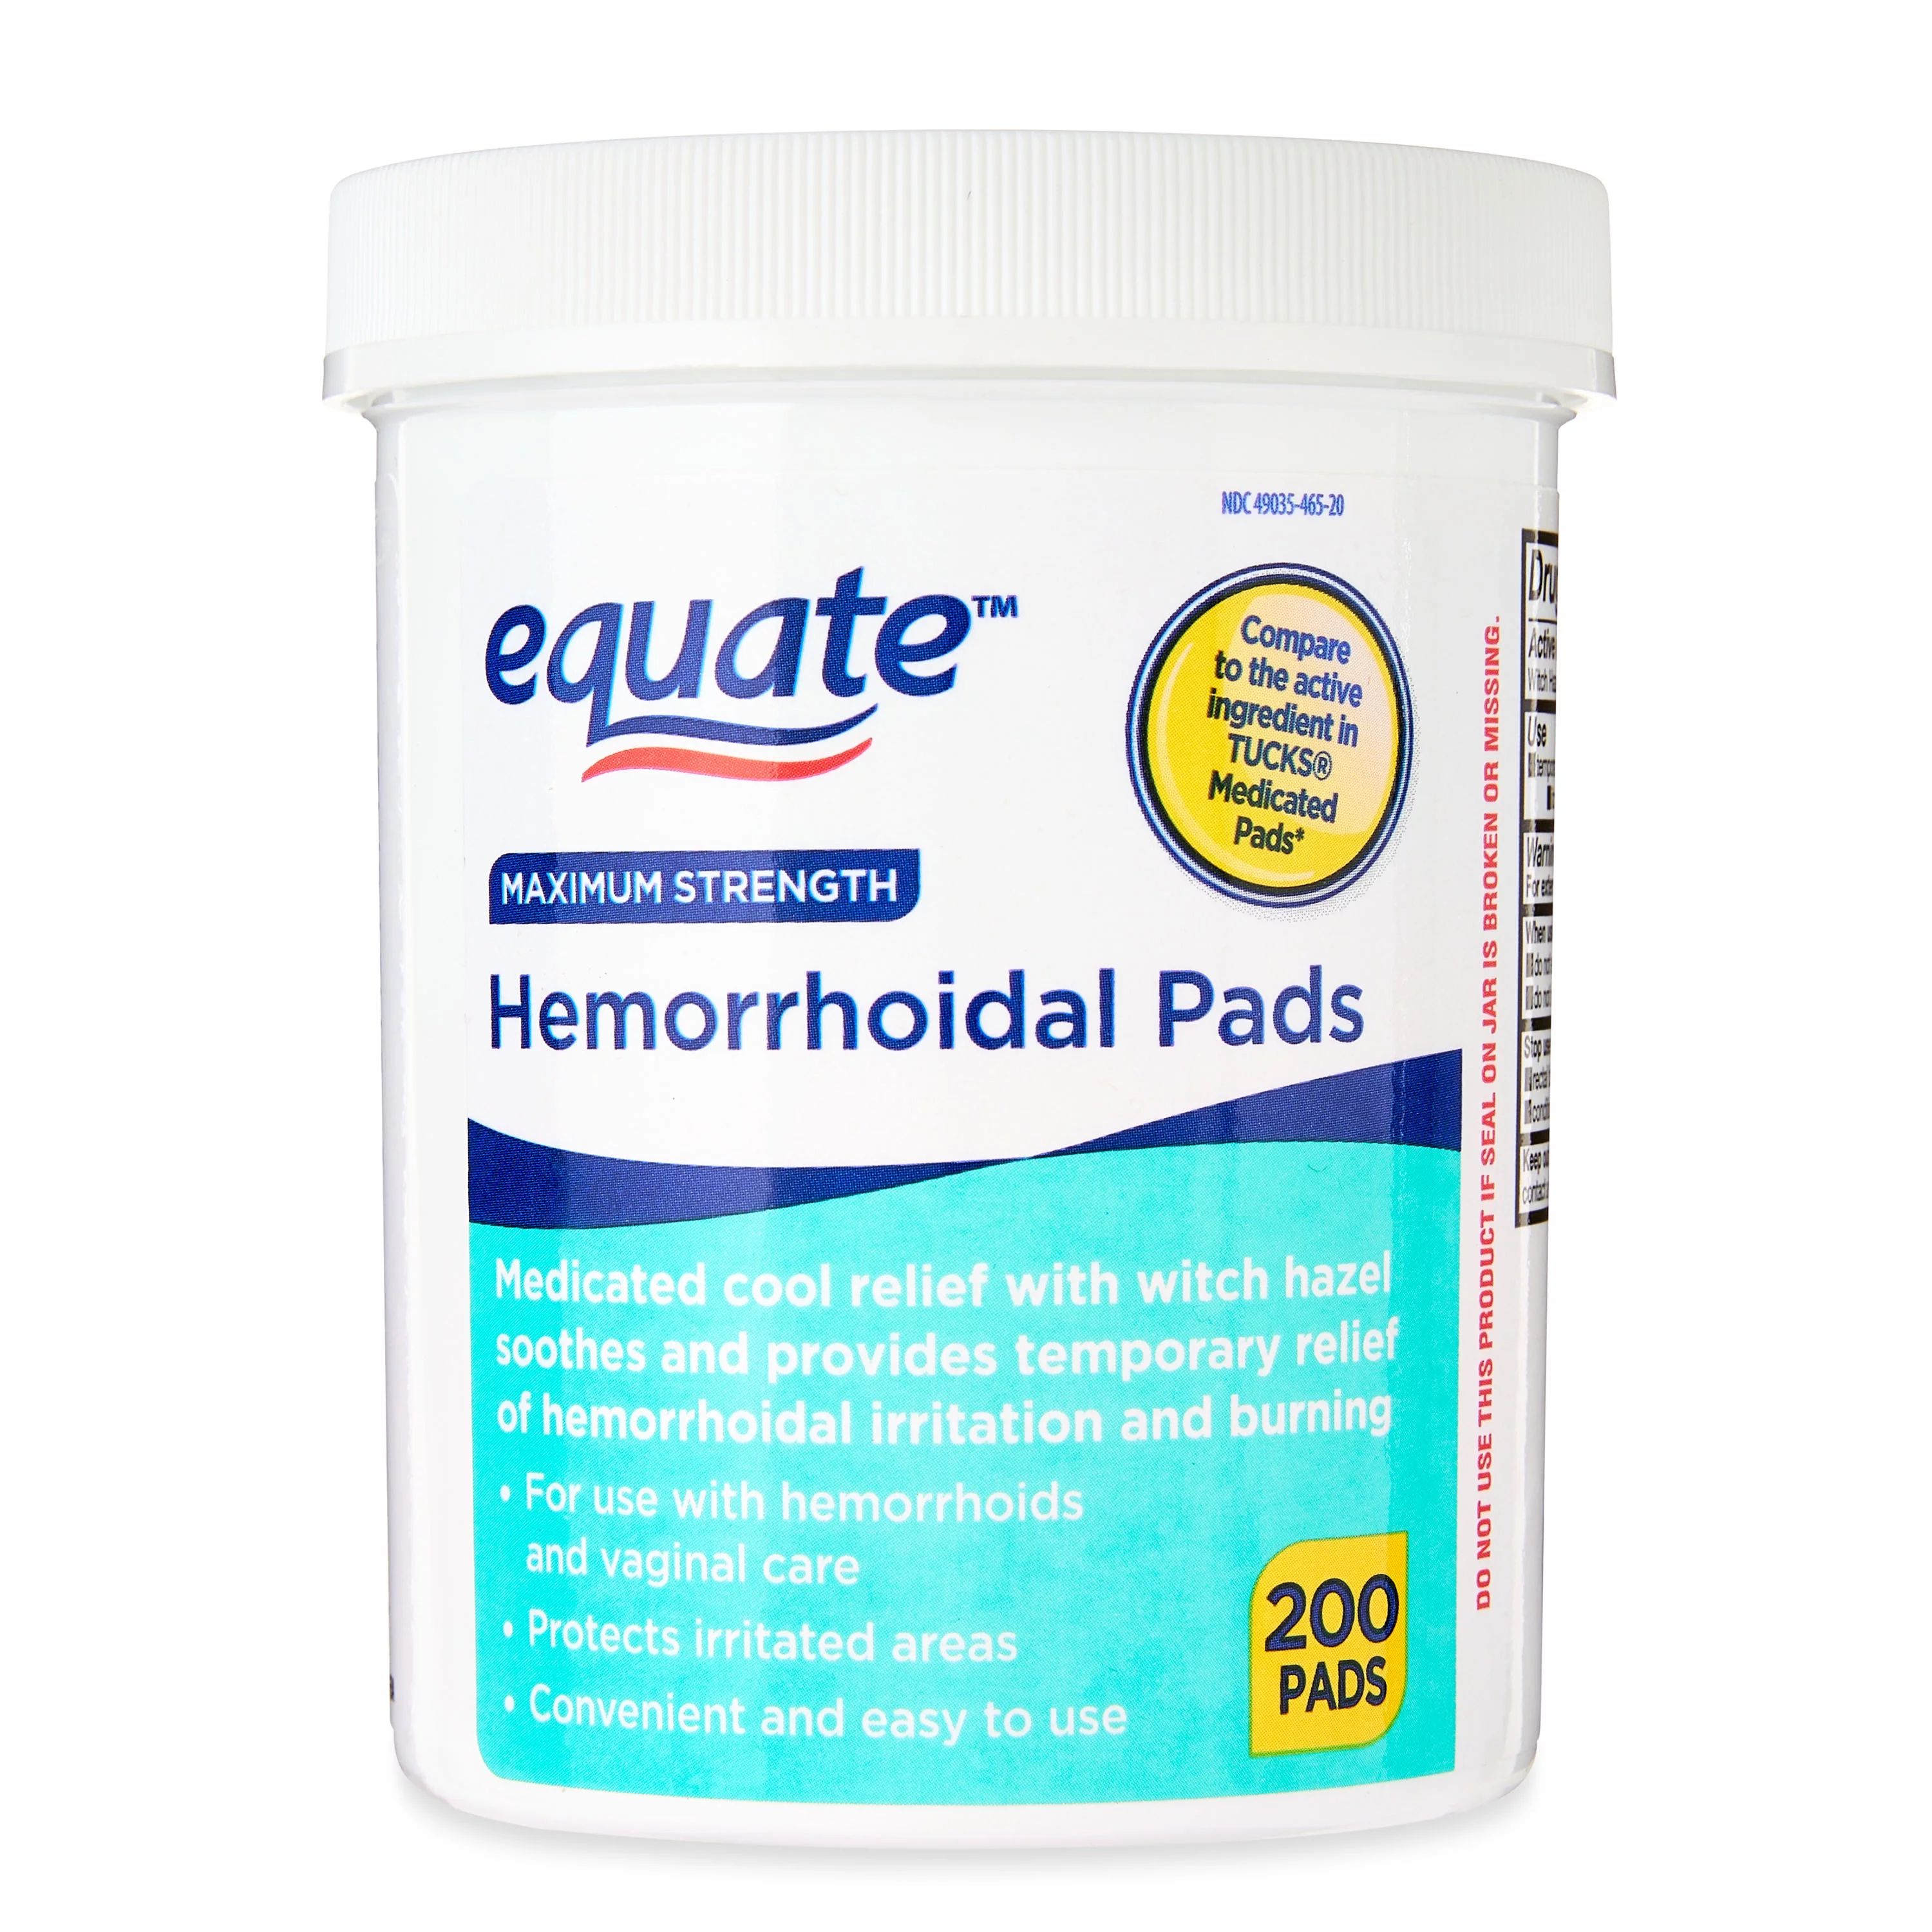 Equate Maximum Strength Medicated Cool Relief Hemorrhoidal Pads, 200 count | Walmart (US)